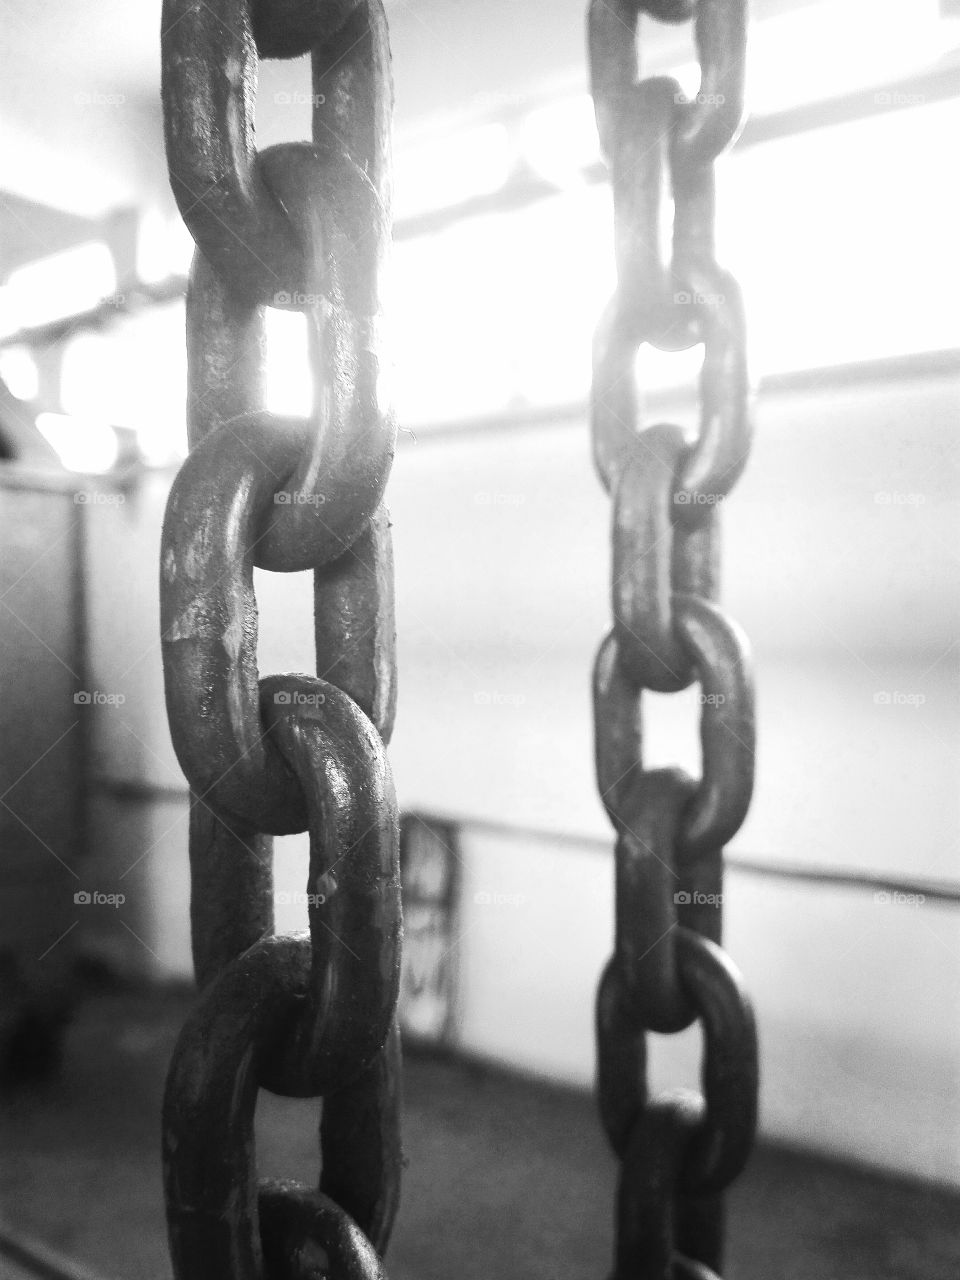 the chains of work